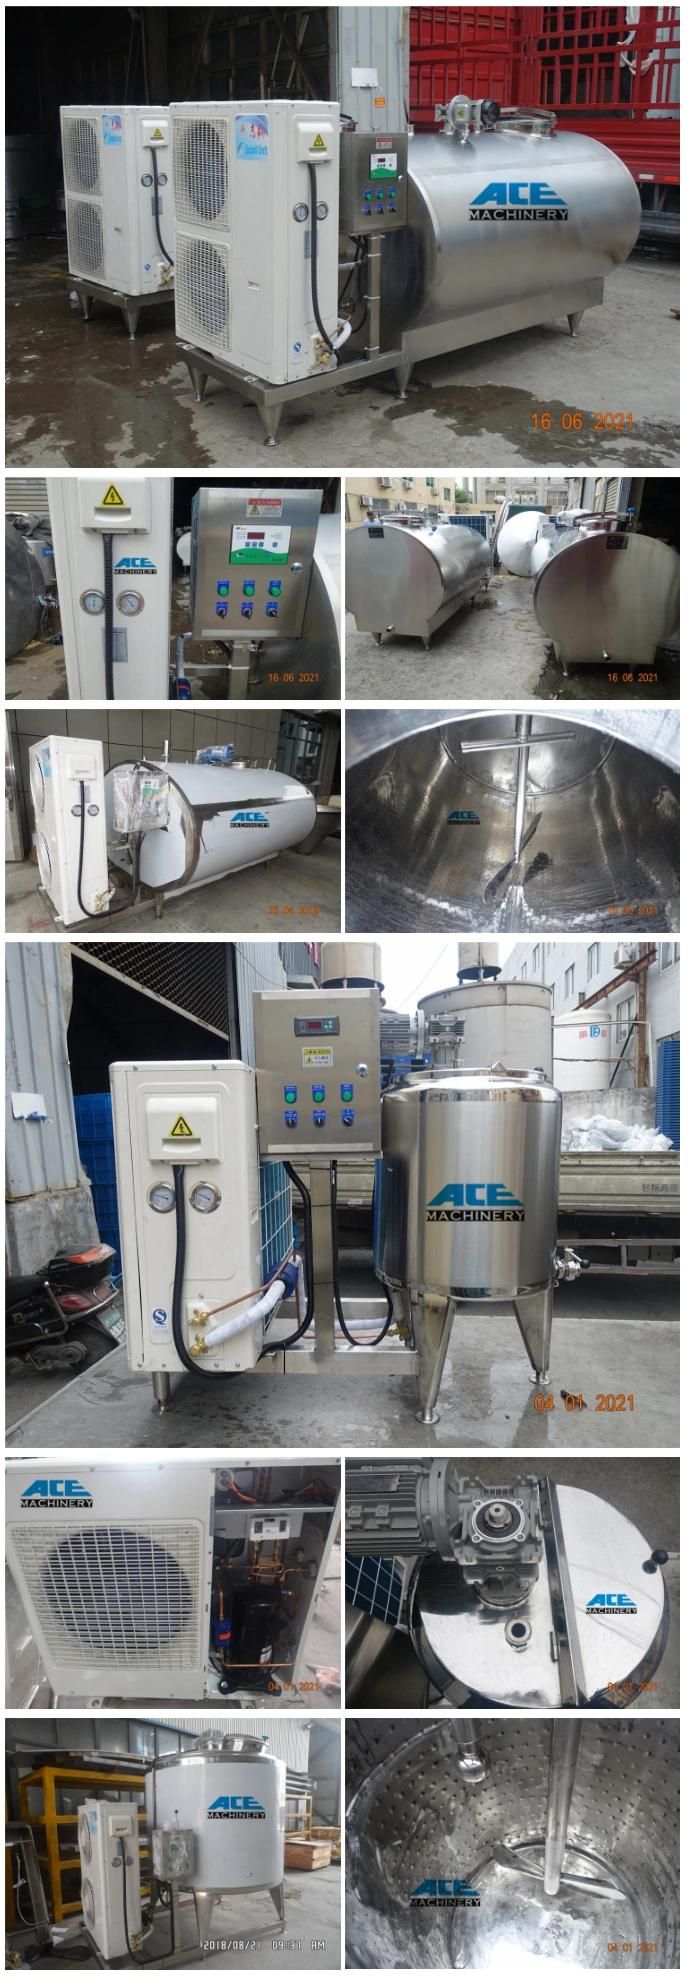 Best Price SS304 SS316L Stainless Steel Milk Processing Equipment